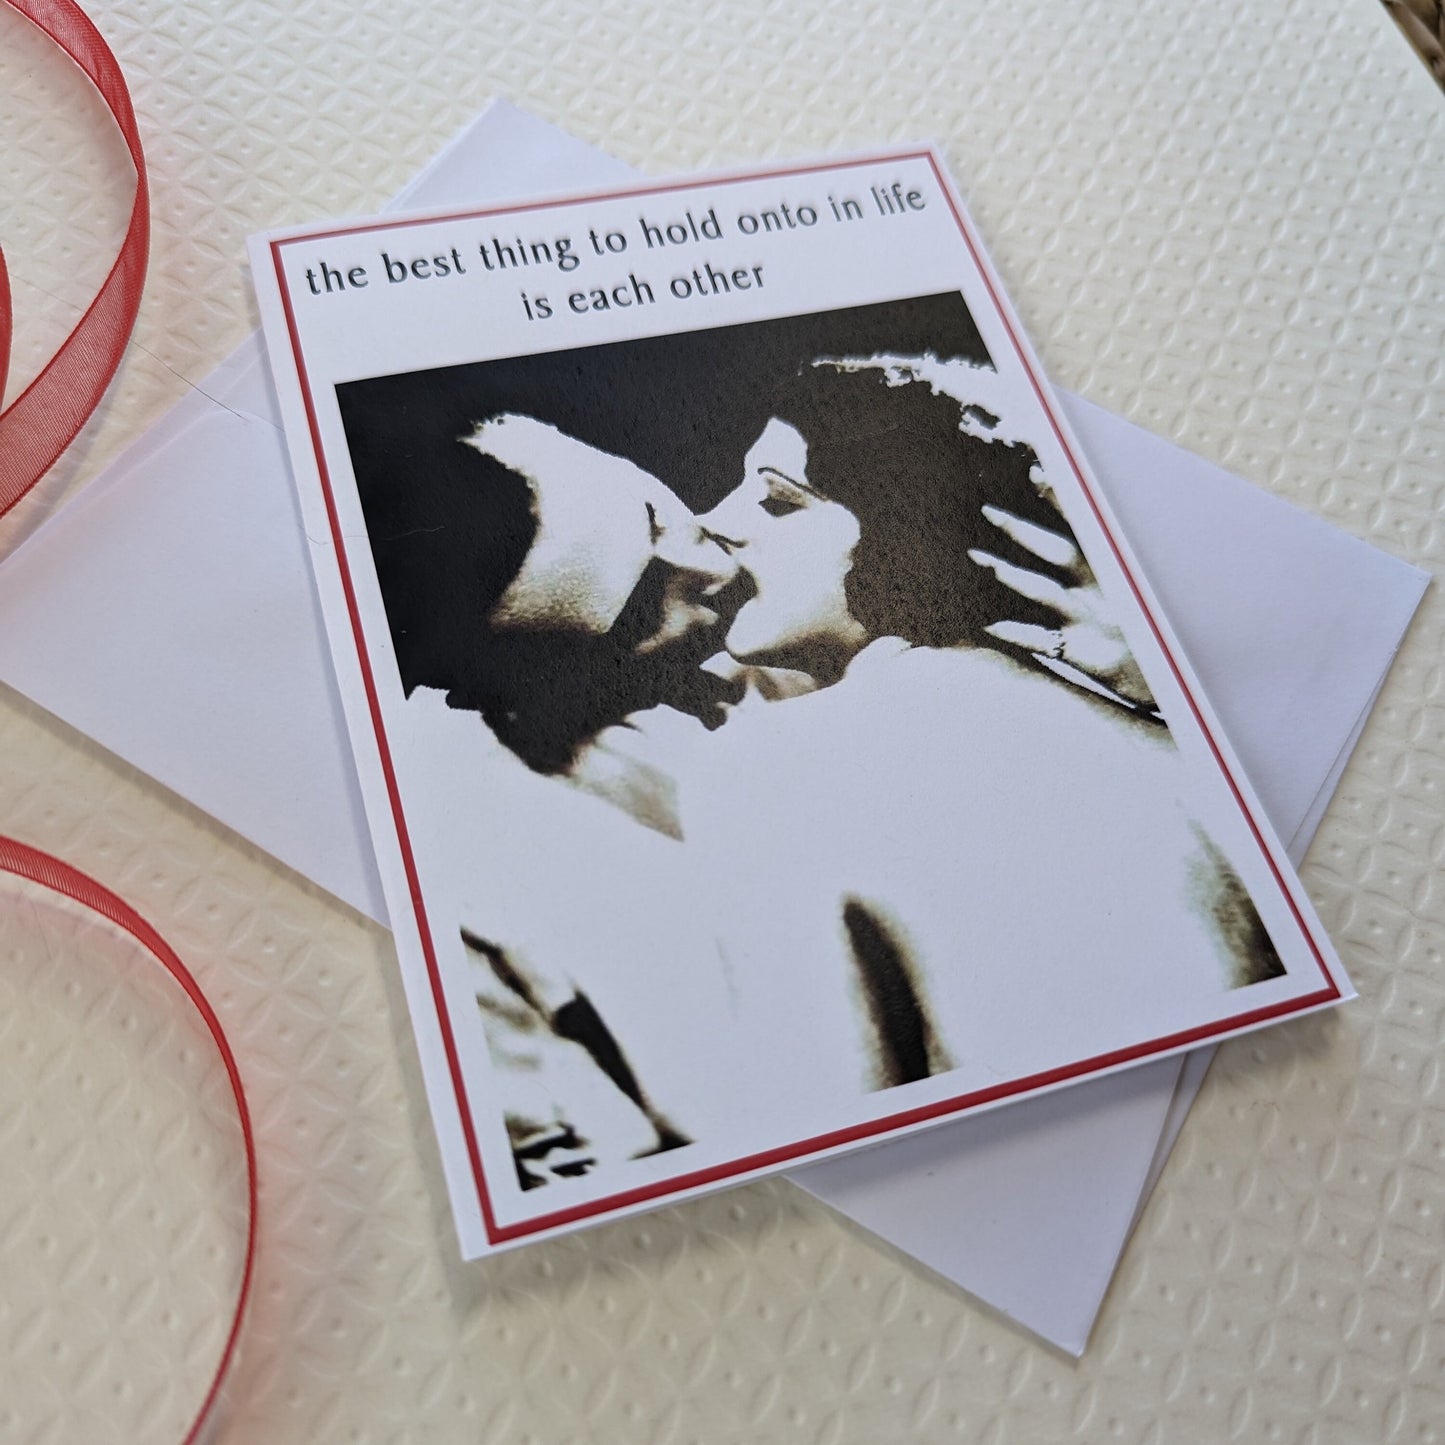 The Best Thing to Hold onto in Life is Each Other - Valentine Card